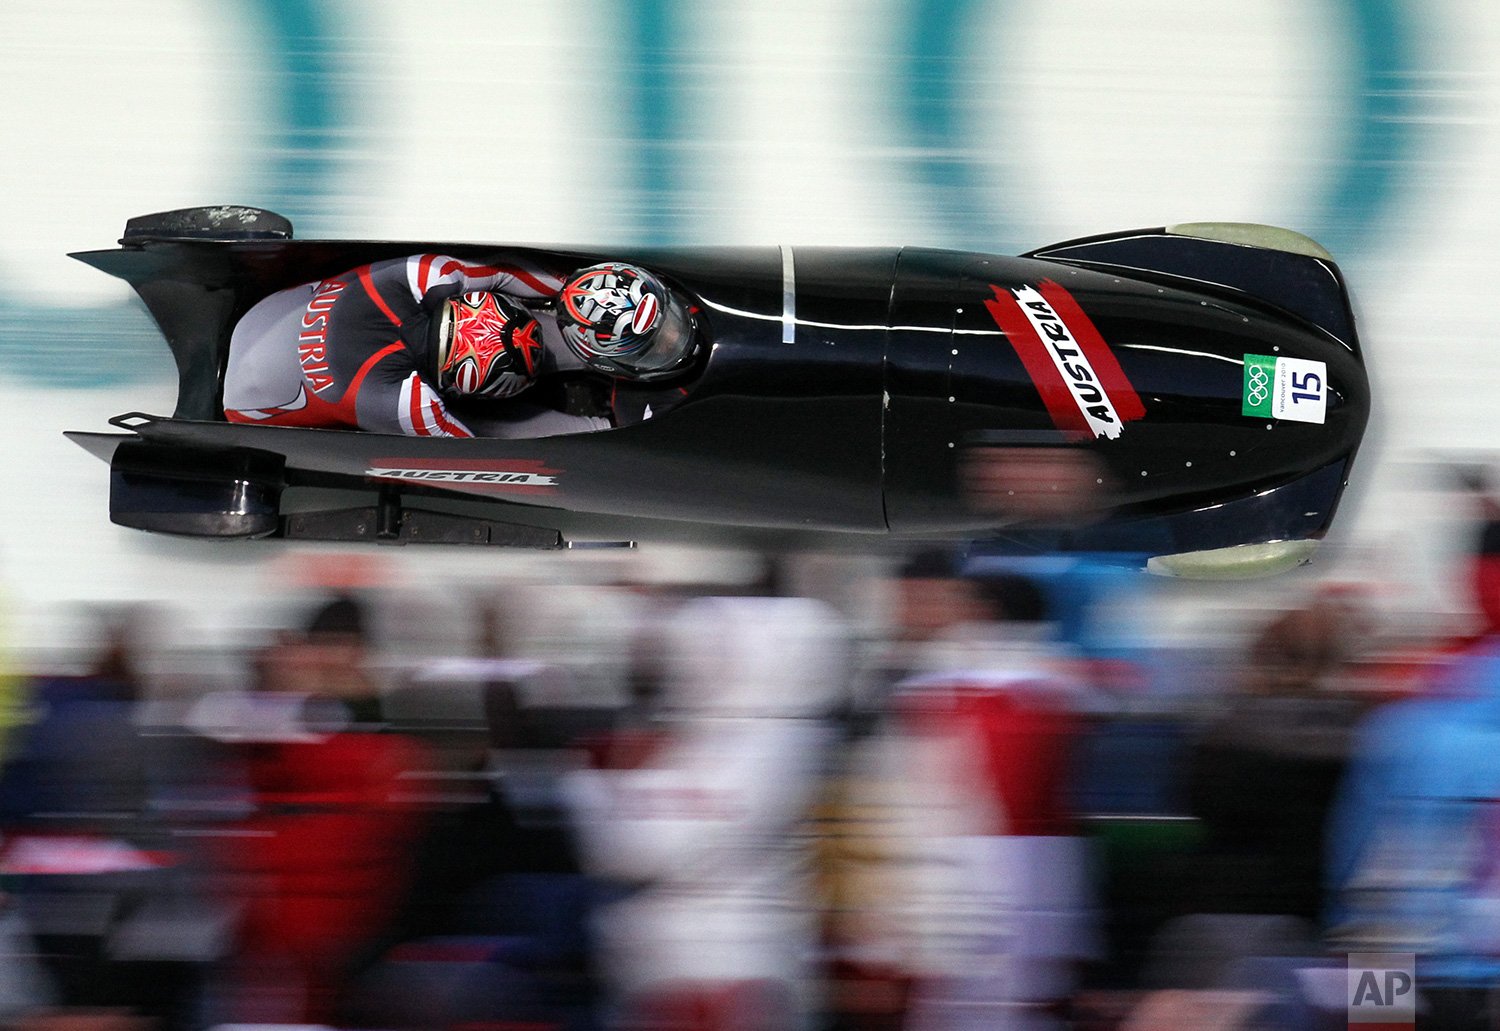  Austria's AUT-2, piloted by Juergen Loacker with brakeman Christian Hackl, competes during the men's two-man bobsled competition at the Vancouver 2010 Olympics in Whistler, British Columbia, on Feb. 20, 2010. (AP Photo/Michael Sohn) 